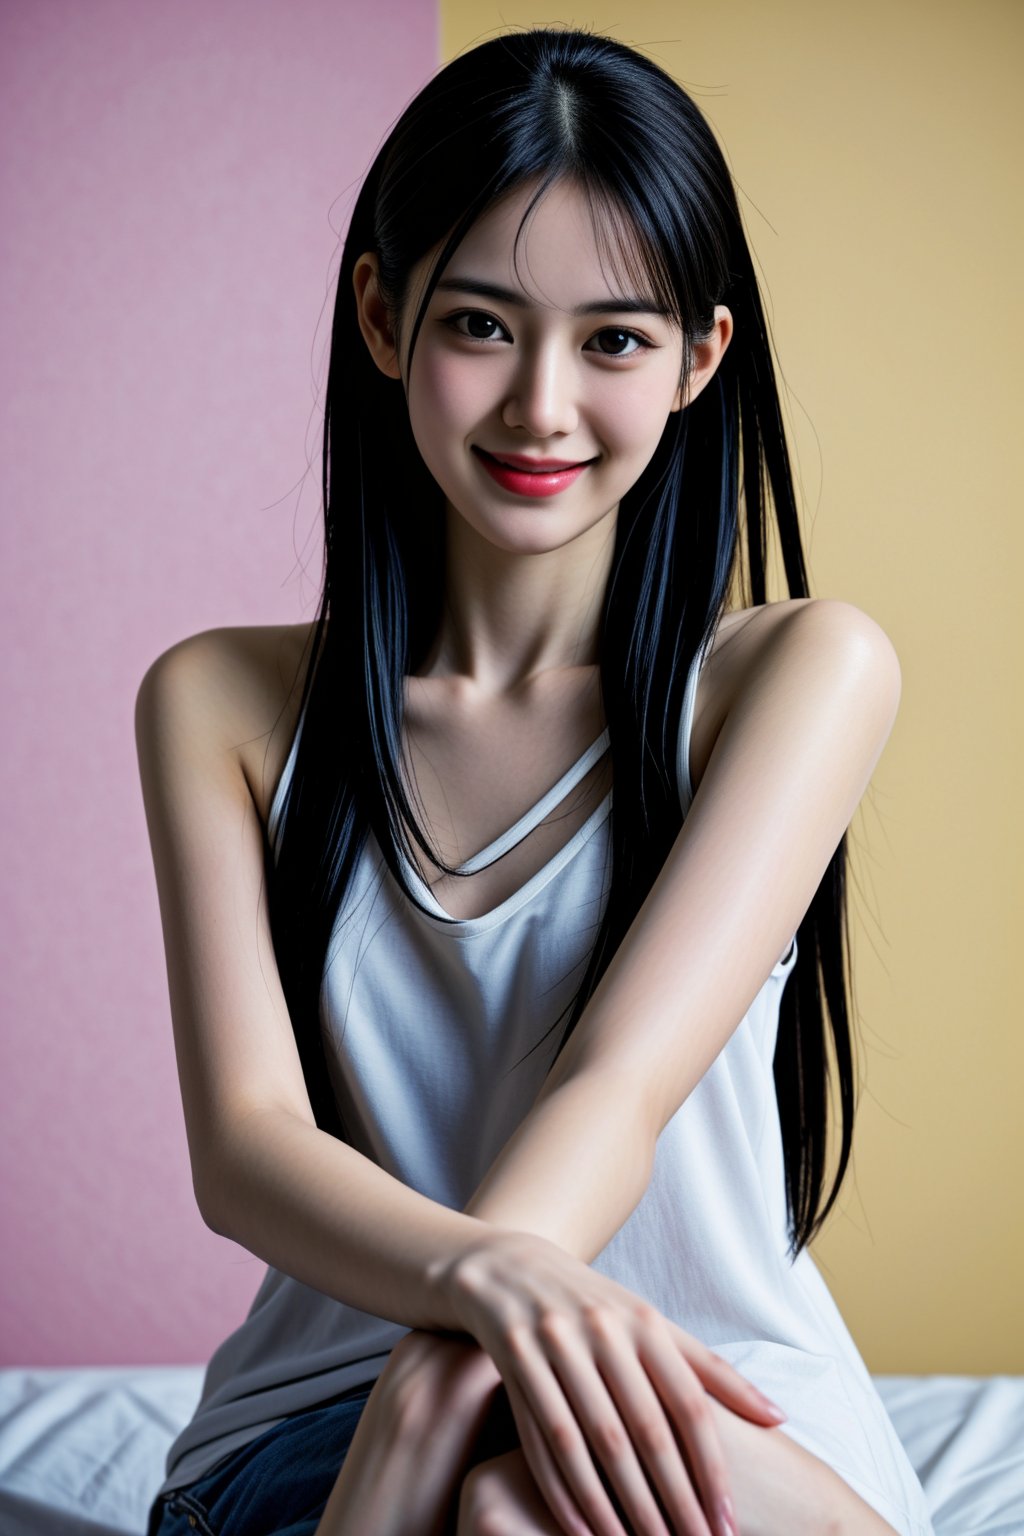 Candid shot of a breathtakingly beautiful teenage bishoujo girl, radiating an irresistible smile. Her messy hairstyle adds to her quirky charm. Her skin is rendered in stunning detail and realistic quality. The ultra-HD photo boasts remarkable colors, capturing every nuance. She's dressed casually for a unique dating dinner, posing relaxed with a supporting gesture, as if sharing a romantic moment. Against a creative abstract background, soft shadows play, accentuating her features. Inspired by umi_yakake, this Hyper Realistic masterpiece transports viewers to a world of beauty and intimacy.,<lora:659111690174031528:1.0>